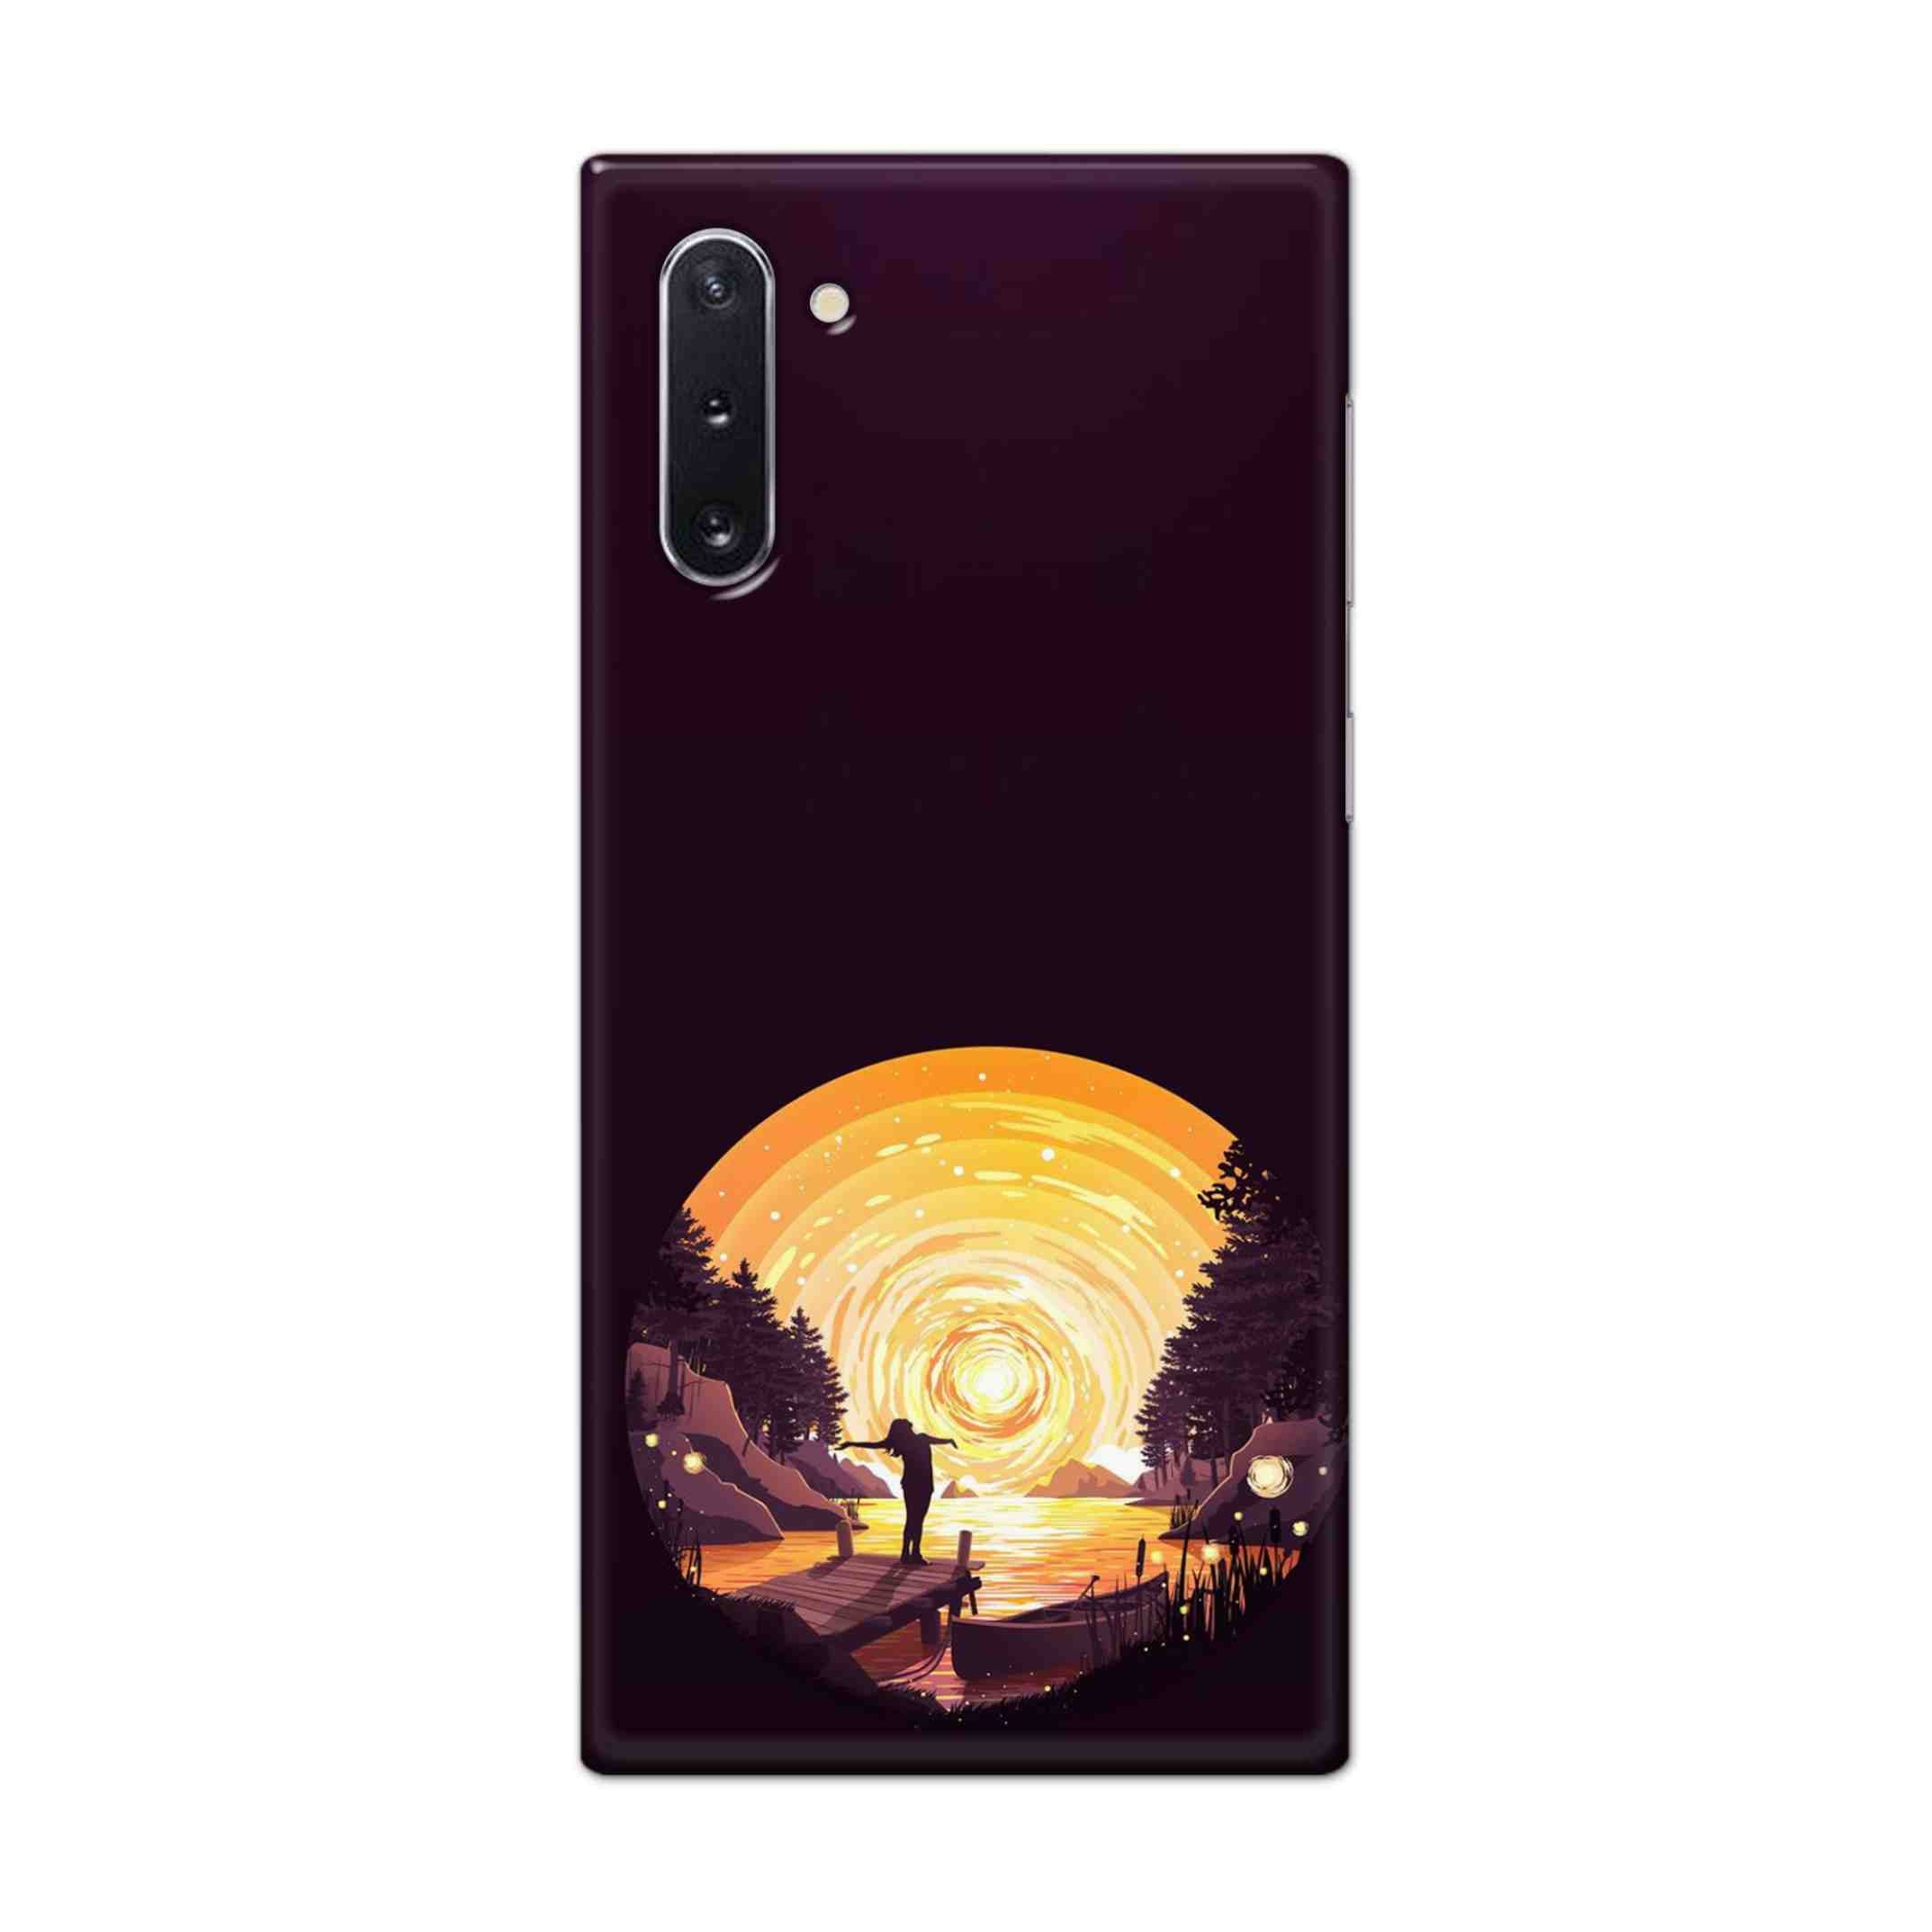 Buy Night Sunrise Hard Back Mobile Phone Case Cover For Samsung Galaxy Note 10 Online